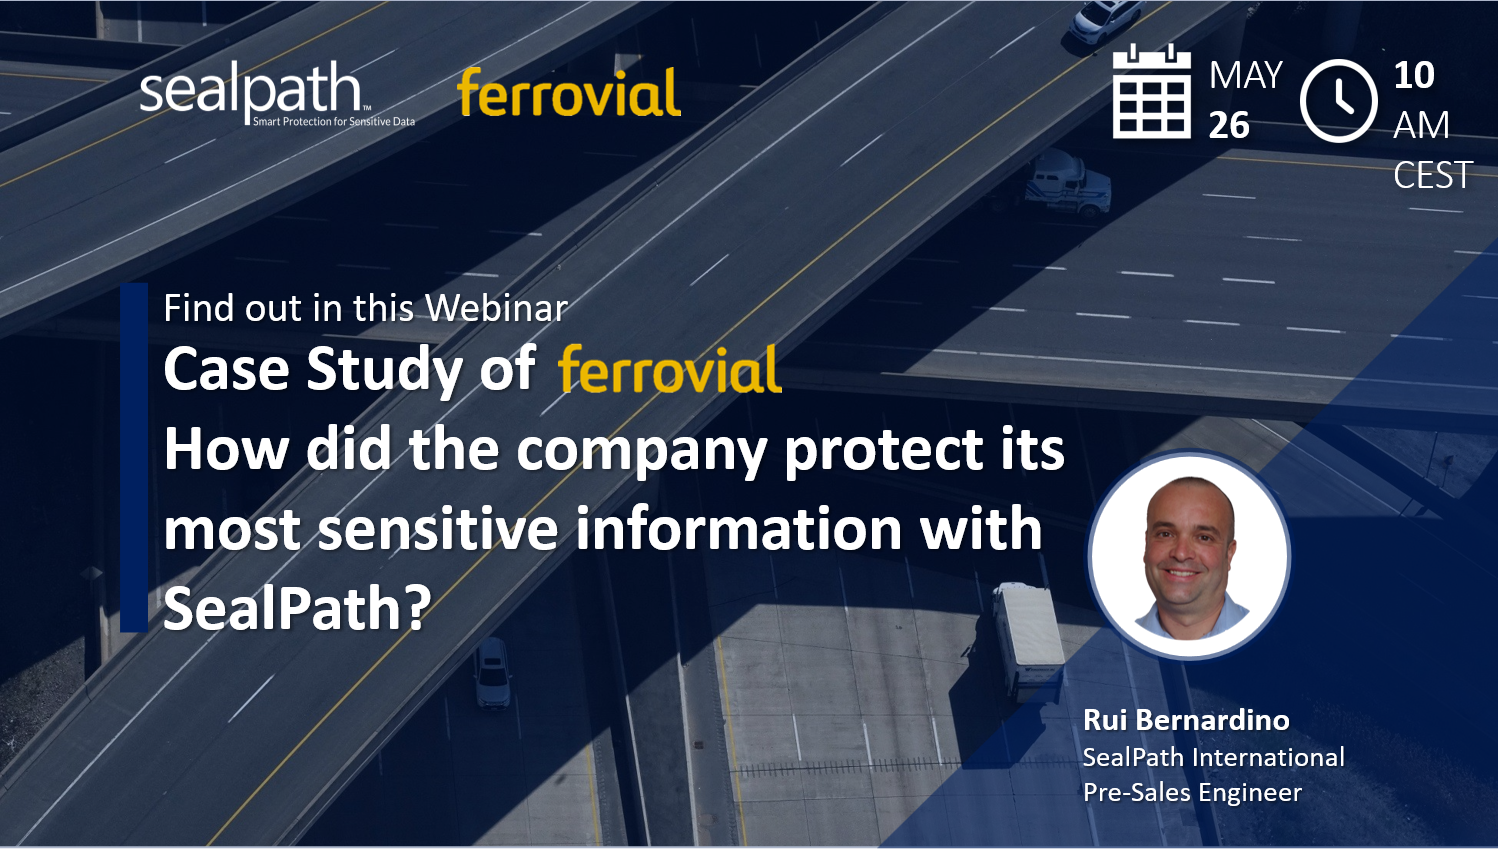 Case Study of Ferrovial – How did the company protect its most sensitive information with SealPath?